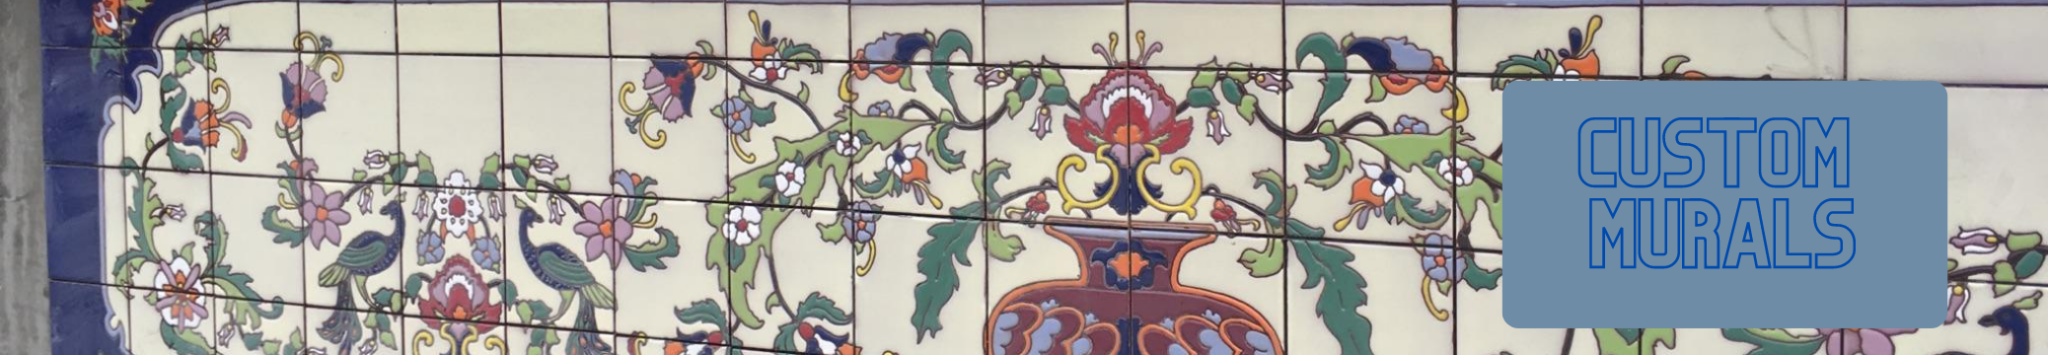 A 1920 reproduction of a floral mural with a vase